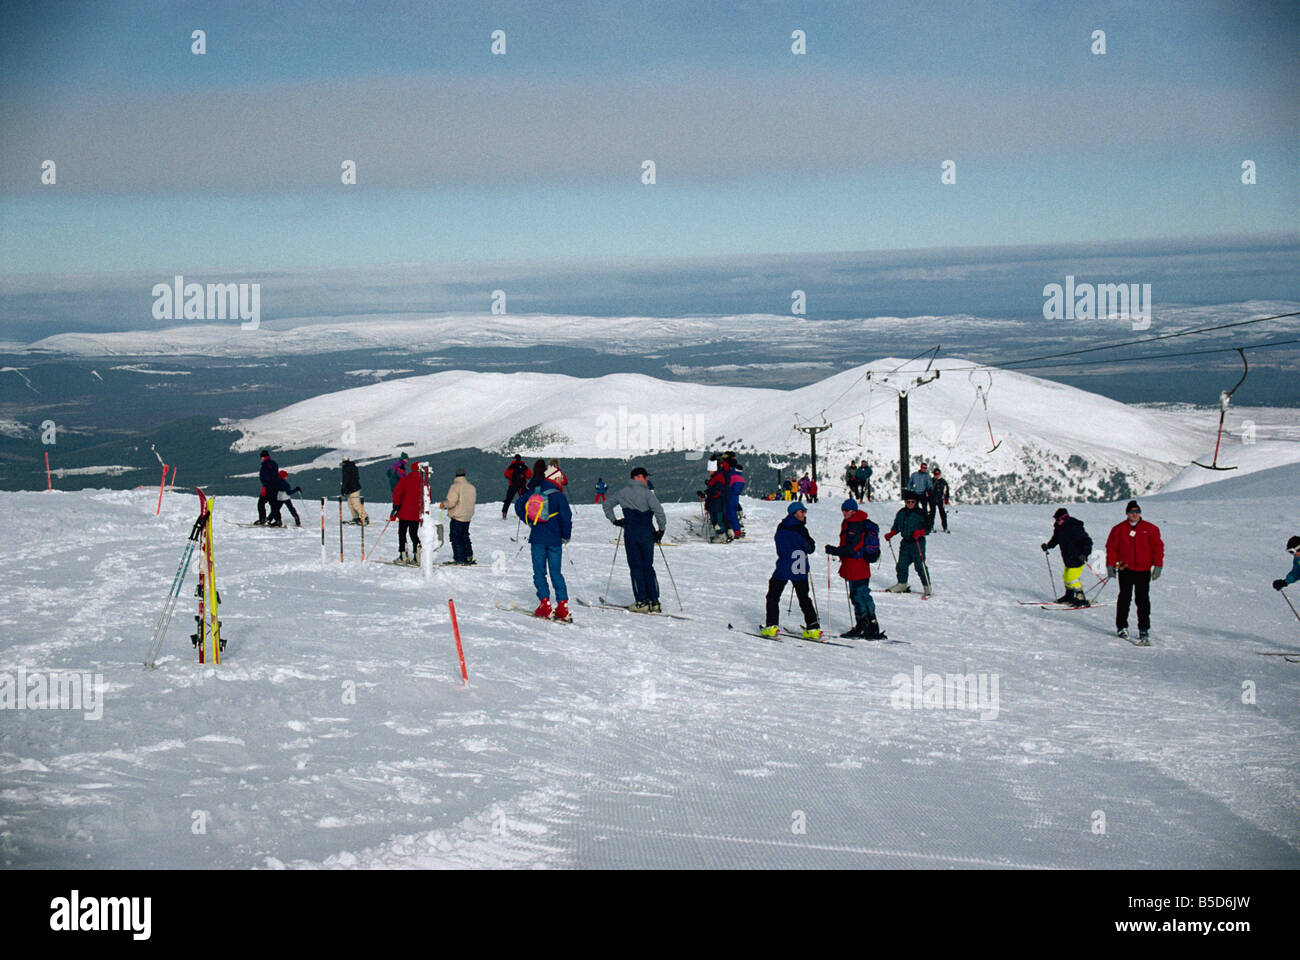 Skiers on the slopes of Aviemore in the Cairngorms Highlands Scotland UK R Rainford Stock Photo